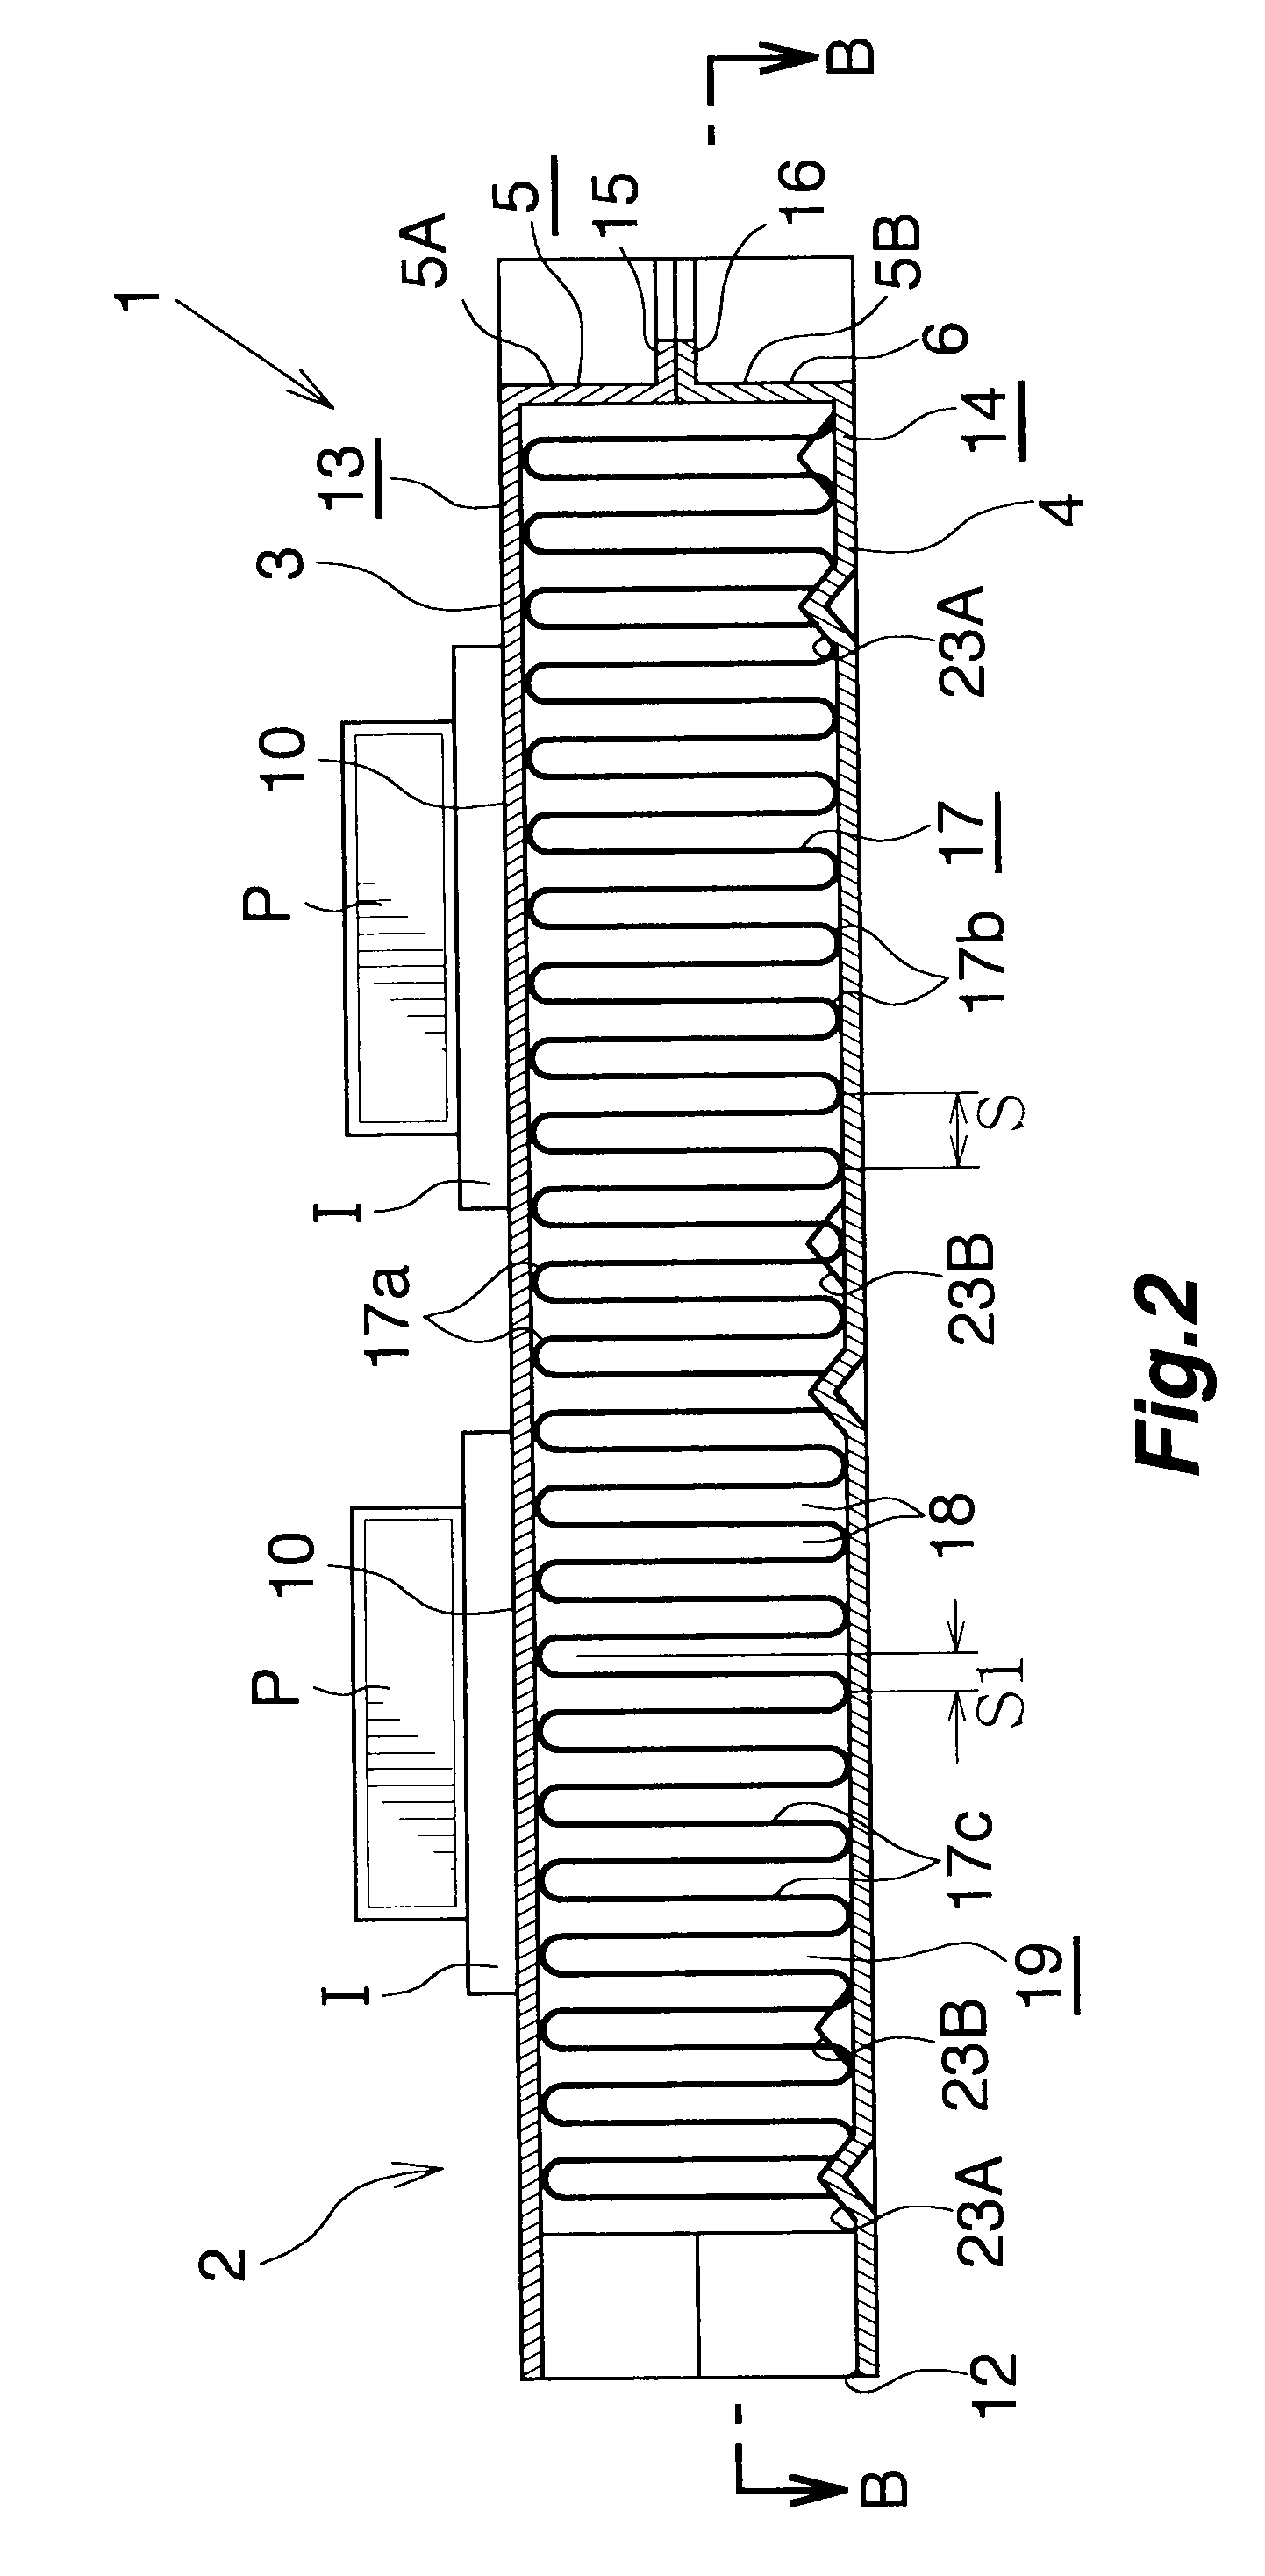 Liquid-cooled-type cooling device